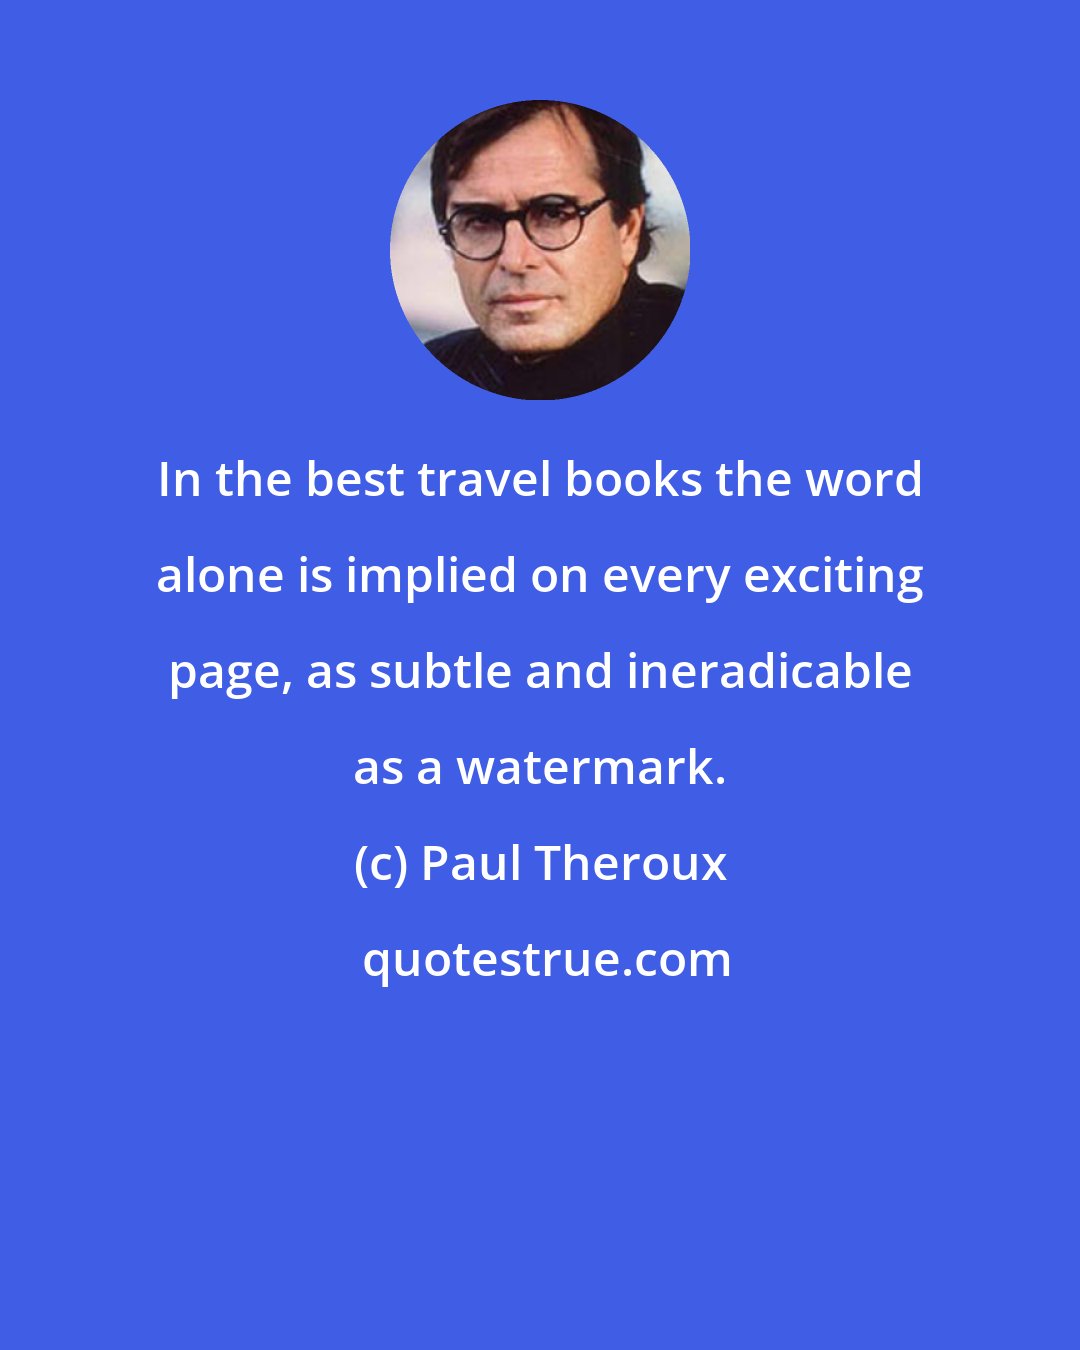 Paul Theroux: In the best travel books the word alone is implied on every exciting page, as subtle and ineradicable as a watermark.